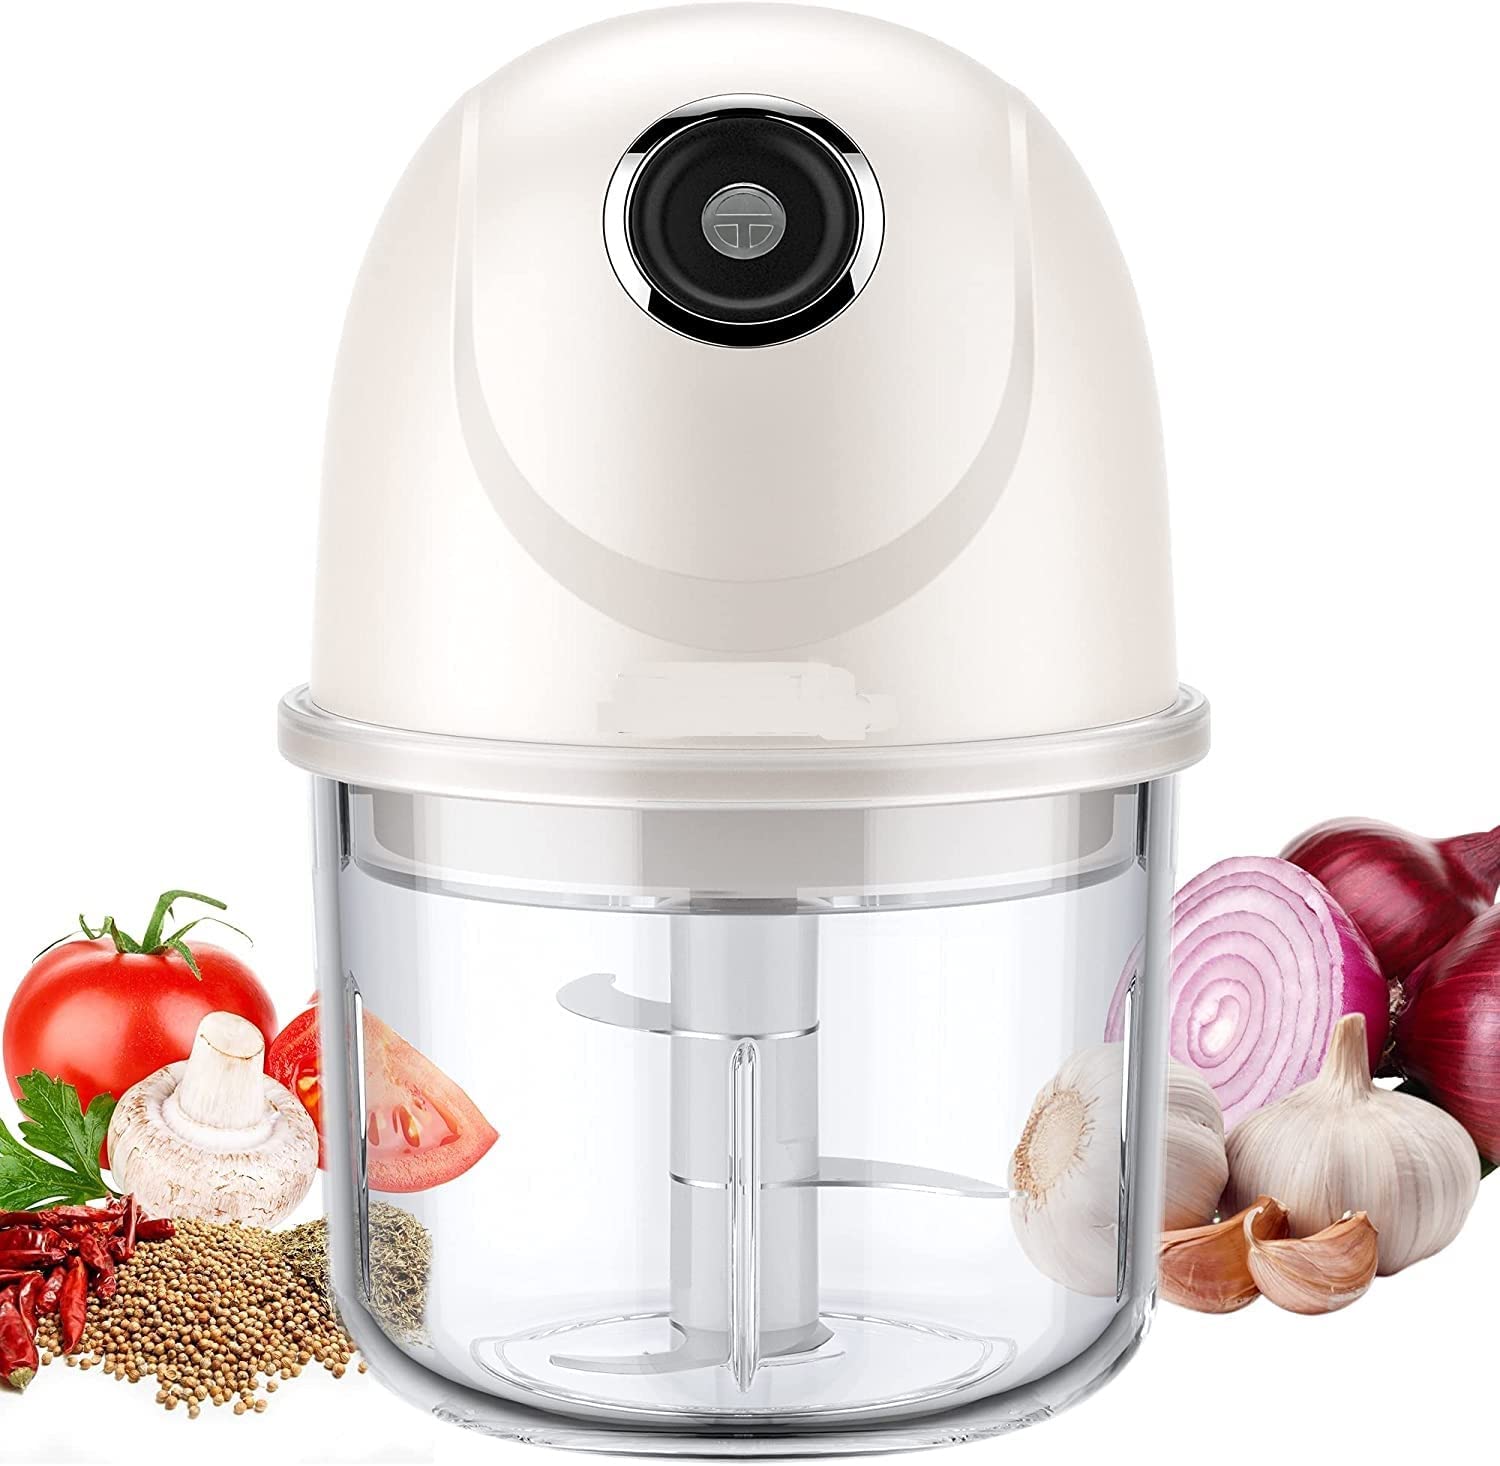 Phisinic Electric Food Processor, Mini Chopper with USB Battery, 3 Sharp Stainless Steel Blades, 300 ml Small Chopper for Garlic, Fruit, Meat and Baby Food, BPA-Free Glass Bowl (White)